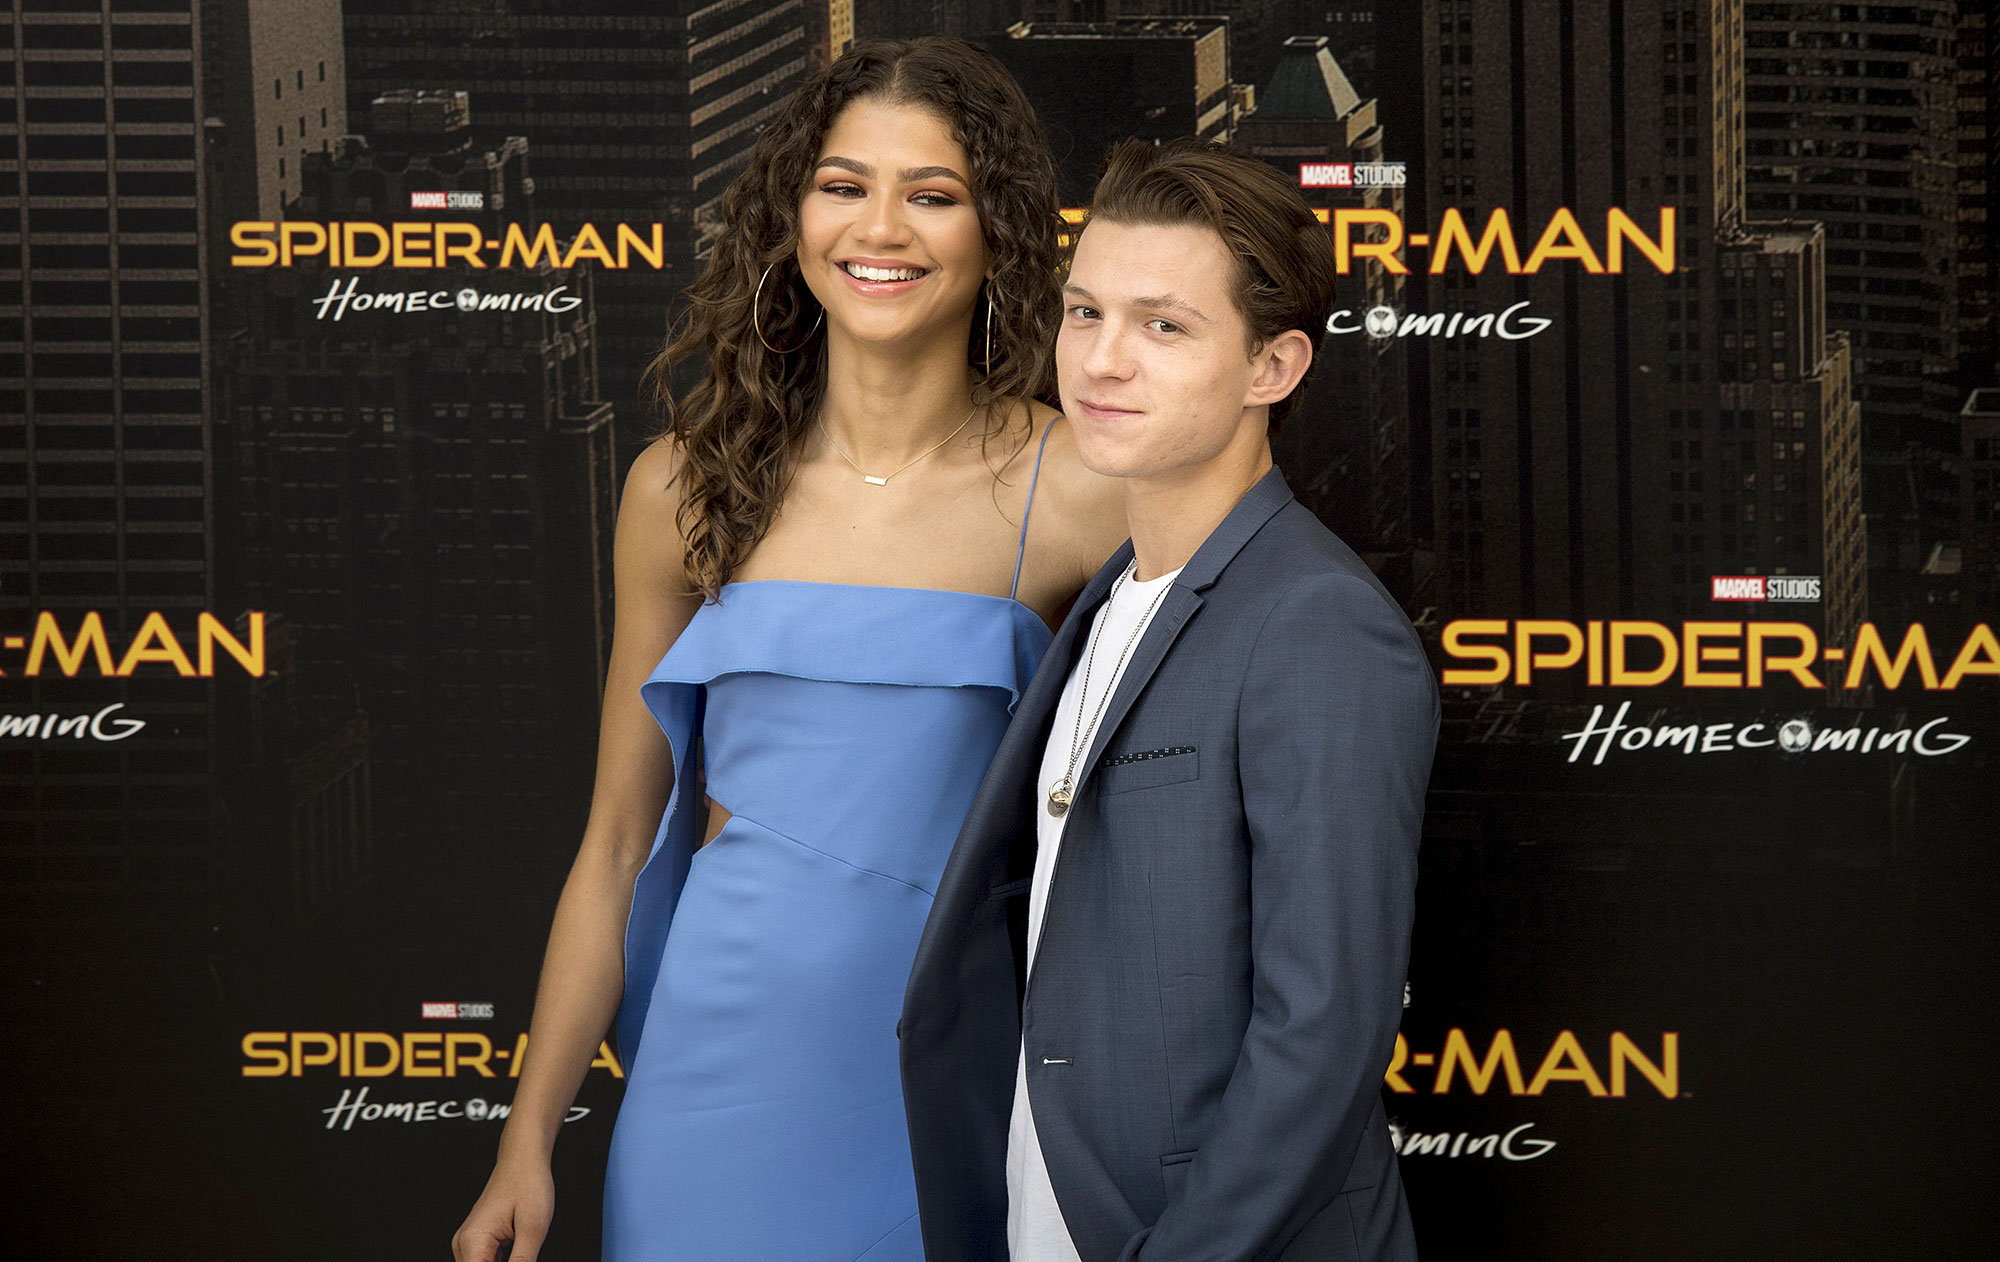 Tom Holland and Zendaya confirm dating rumours as they share a